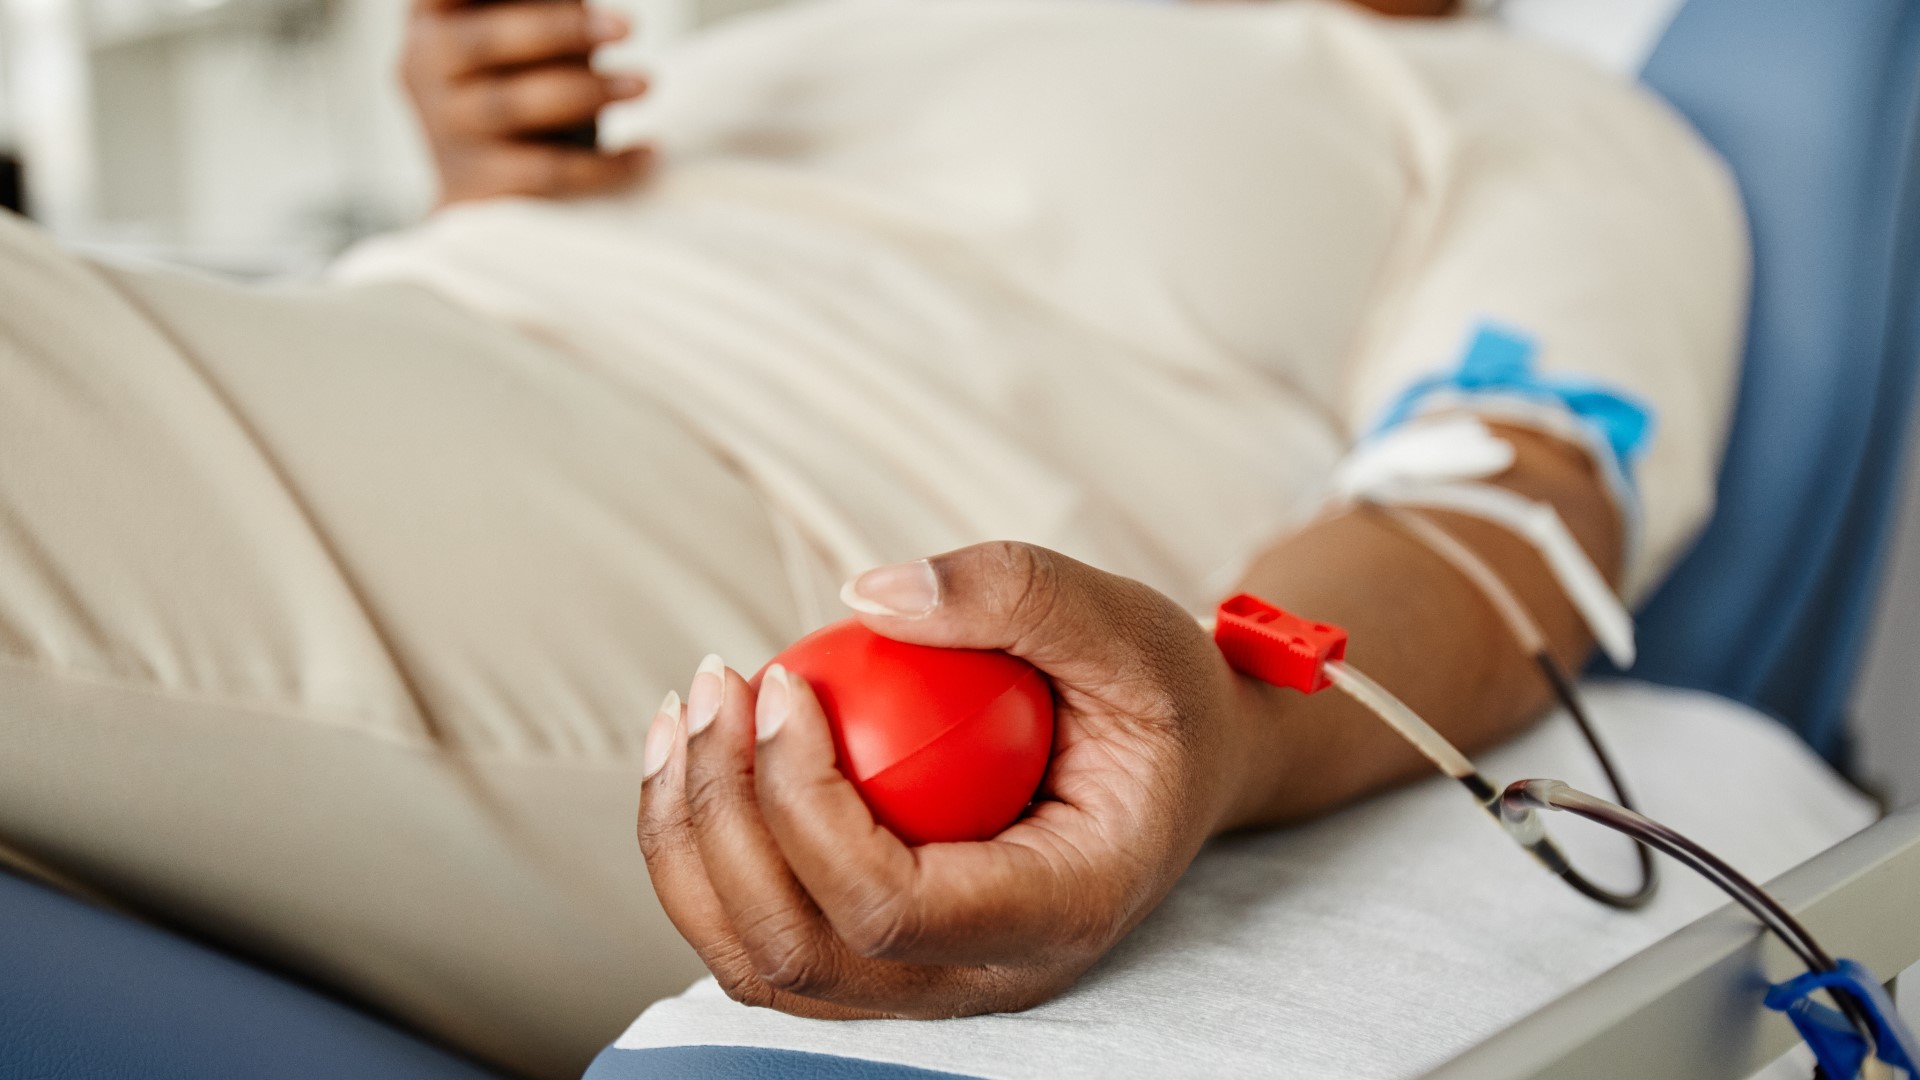 The bill would make it so blood banks and licensed hospitals would have to comply with a request to use autologous or directed donation in most circumstances.